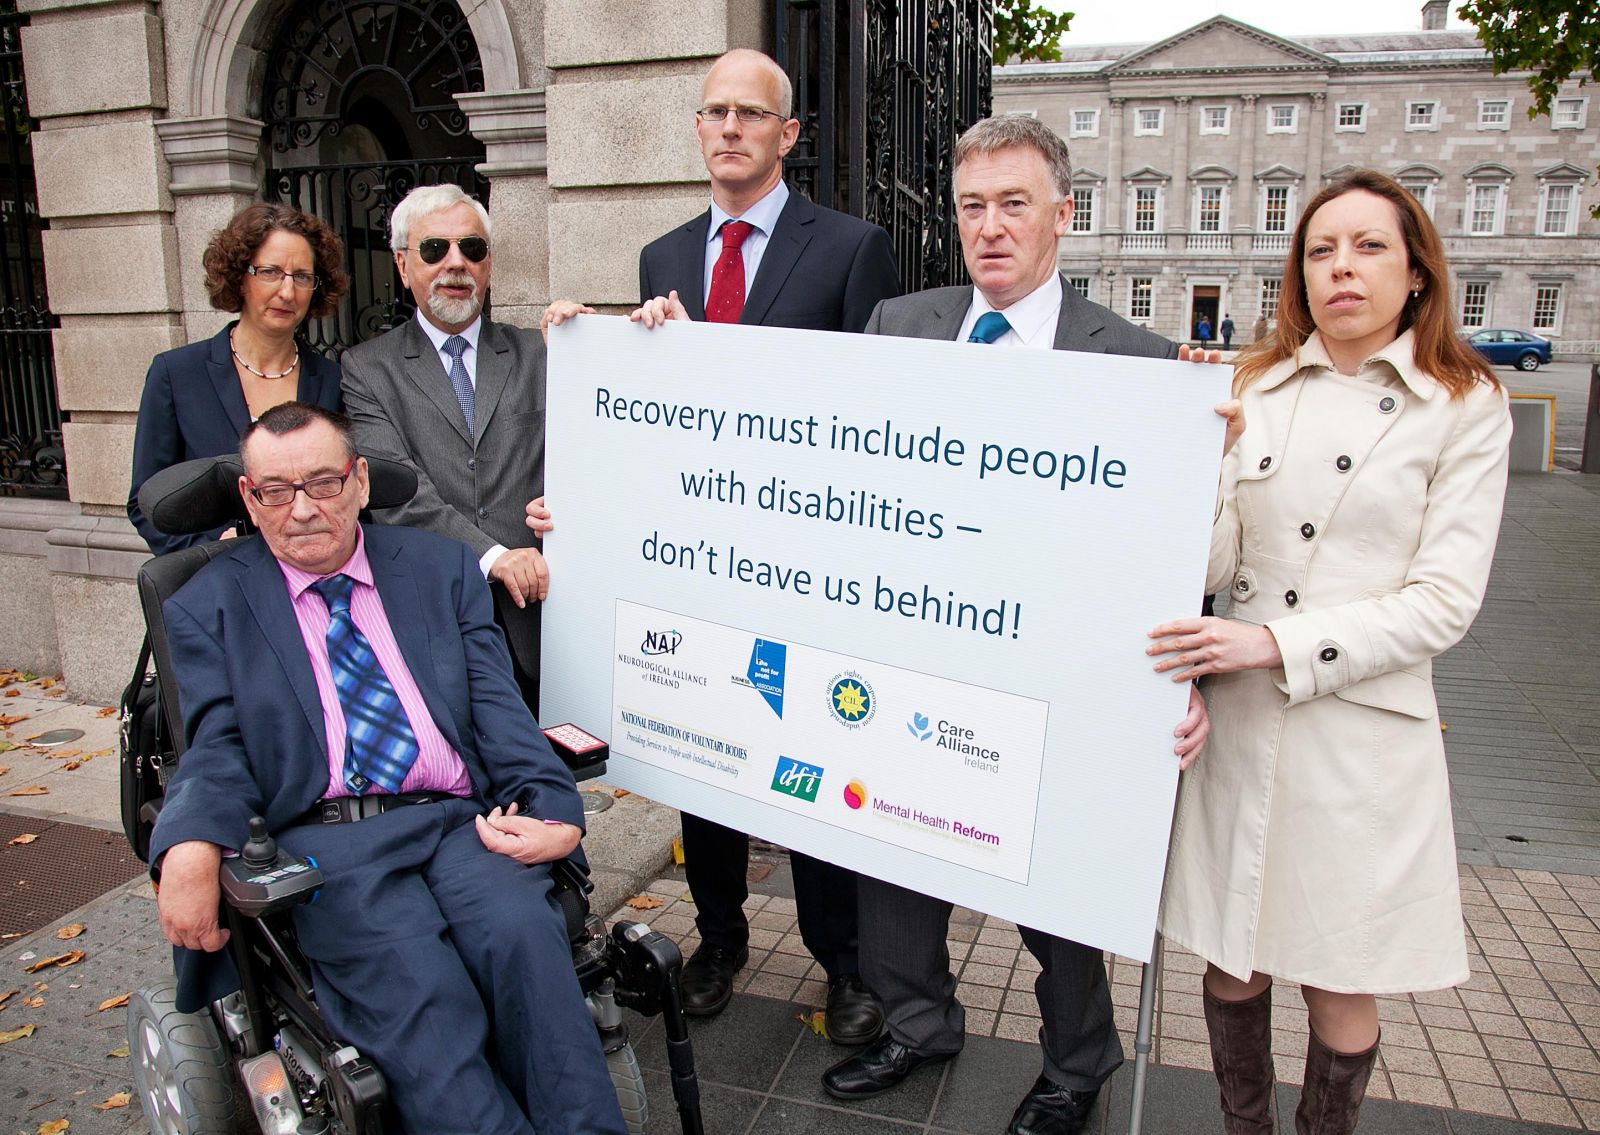 Sign stating: Recovery must include people with disabilities - don't leave us behind: held by Michael McCabe: Center for Independent Living, Shari McDaid : Mental Health Reform, Des Kenny : Not for Profit Business Association, Liam O'Sullivan : Care Alliance Ireland, John Dolan : Disability Federation of Ireland, Mags Rogers : Neurological Alliance of Ireland